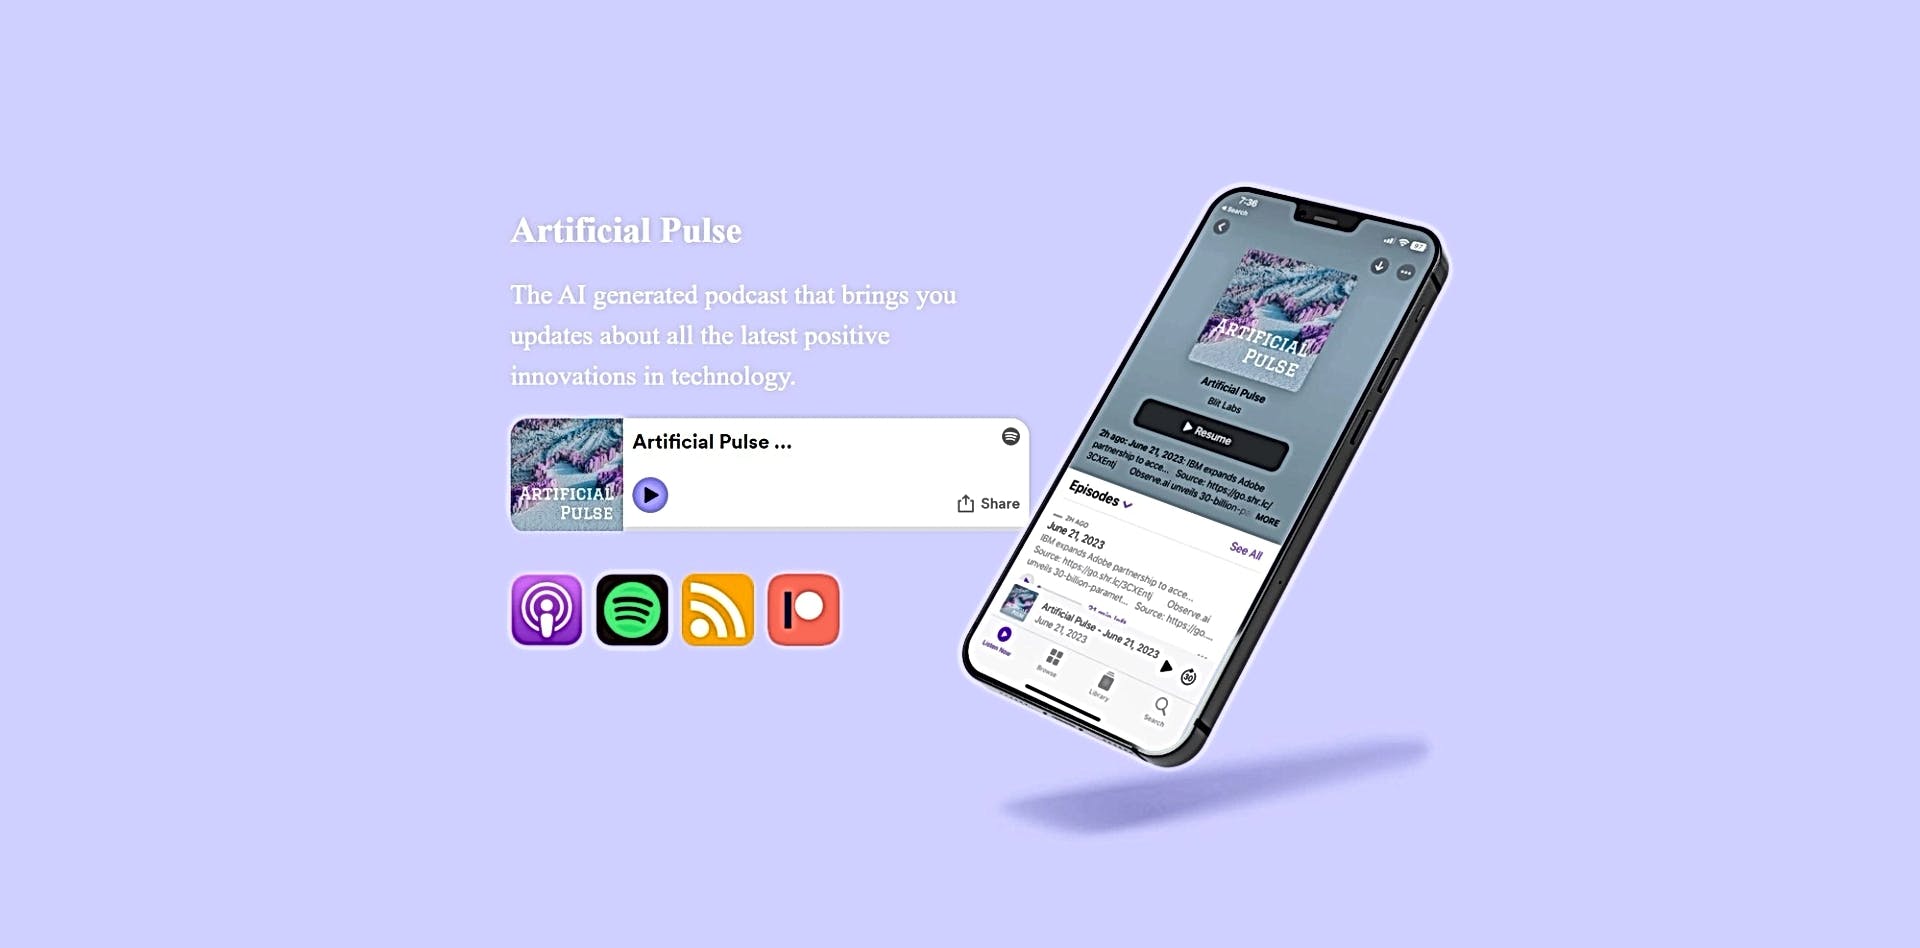 Artificial Pulse featured